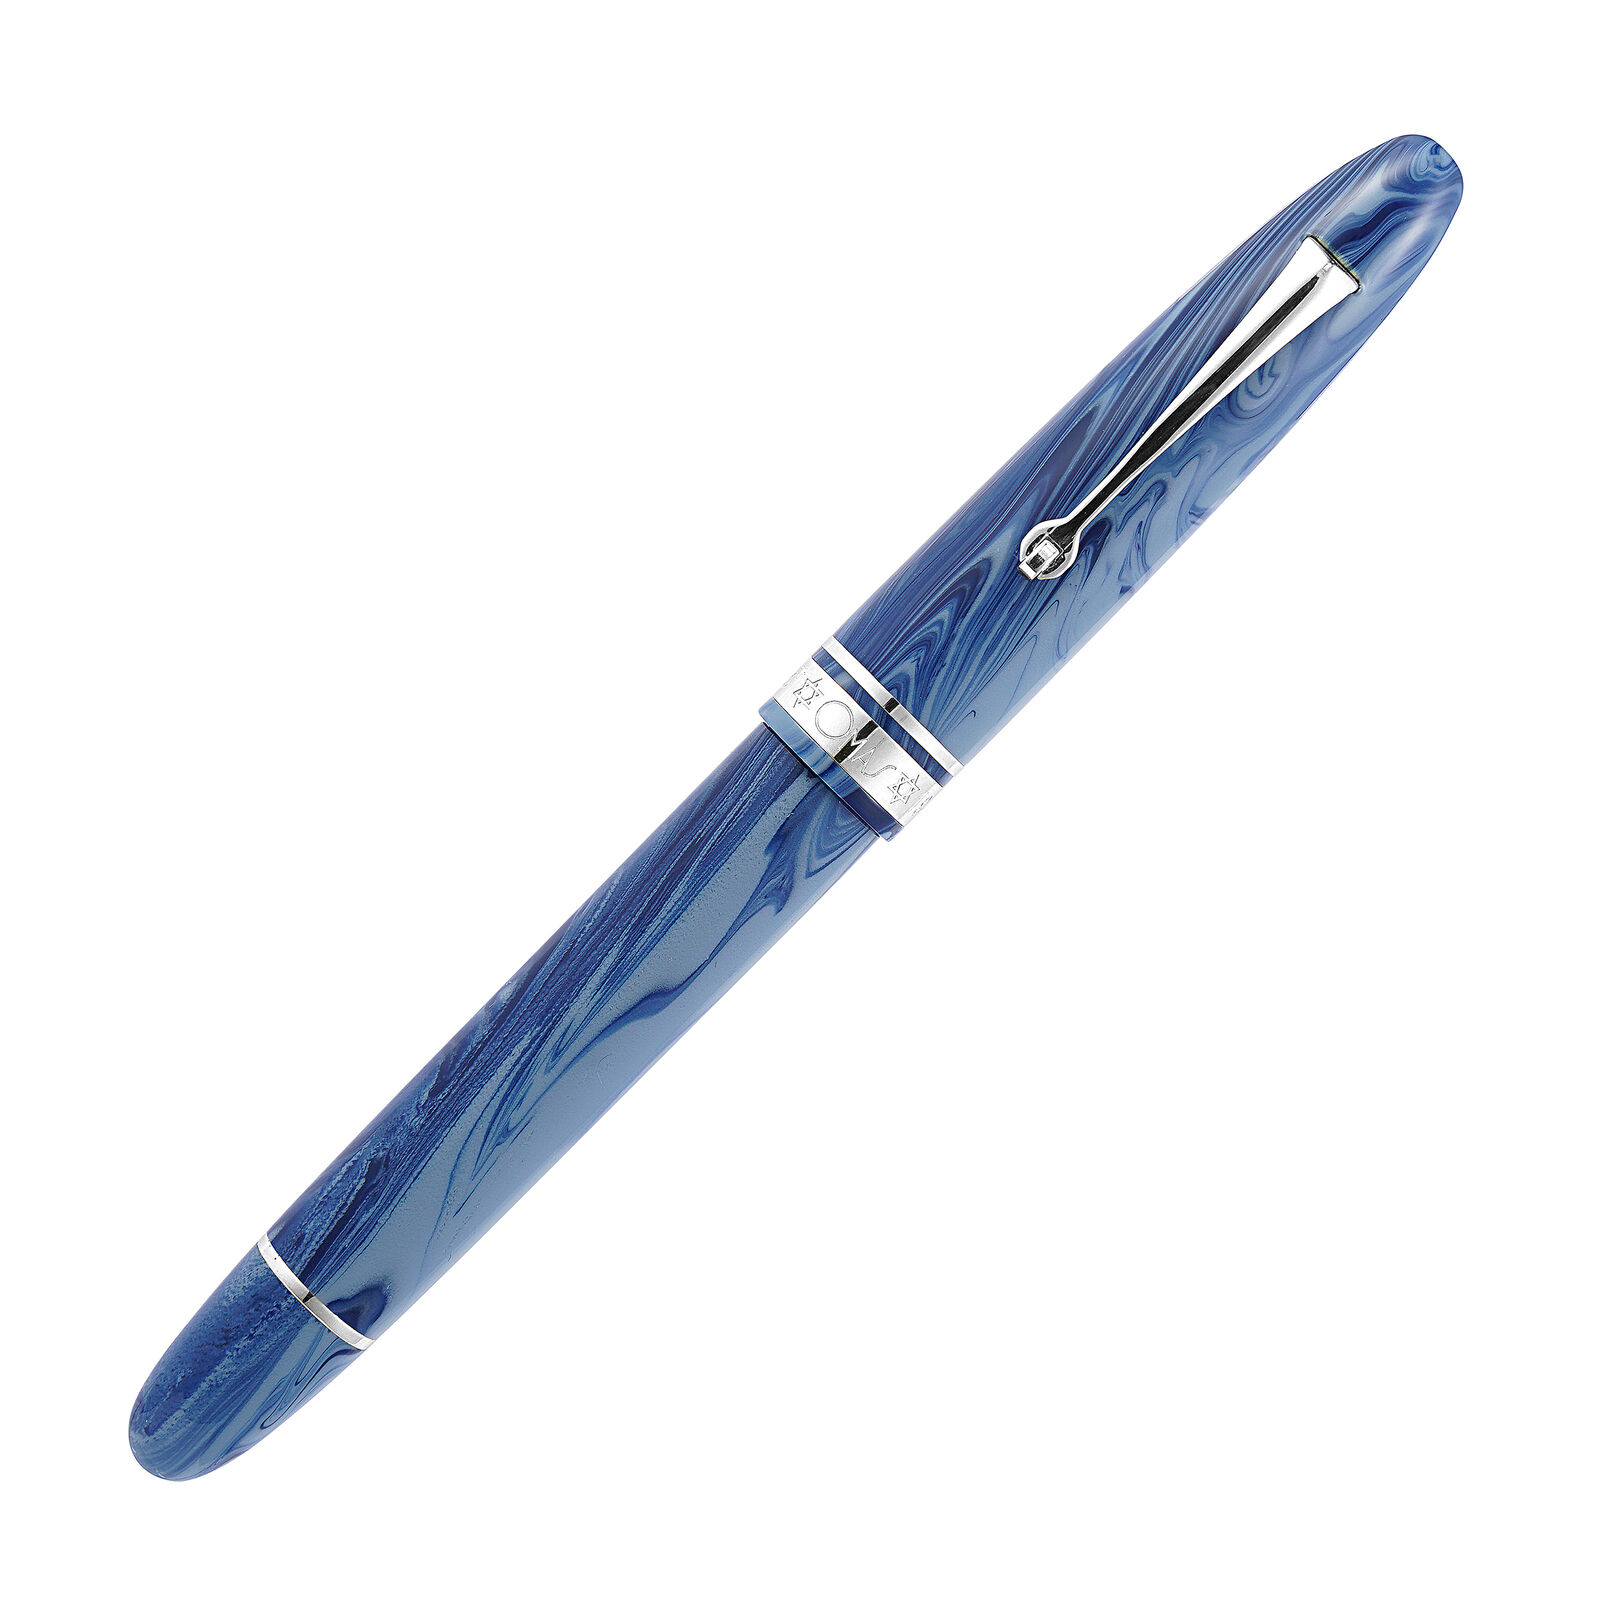 Omas Ogiva Israel Limited Edition Fountain Pen with Silver Trim - 14kt Medium